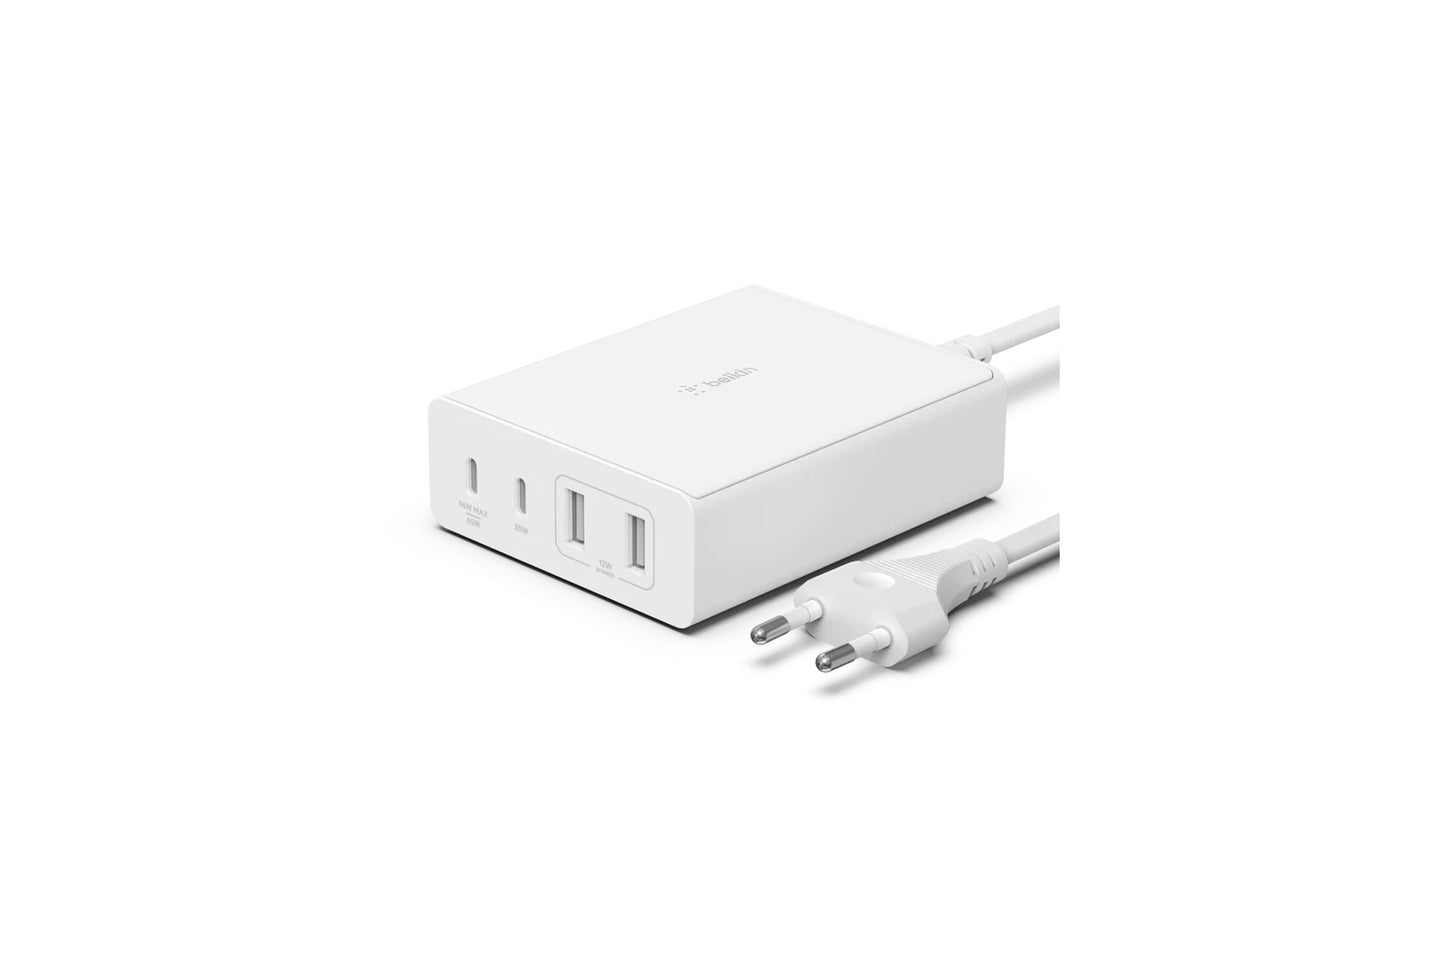 Belkin 108W GaN 4-Port Fast Charger with PPS Technology: Compact and Powerful Charger for MacBook, iPad, iPhone, and Other USB-C Devices